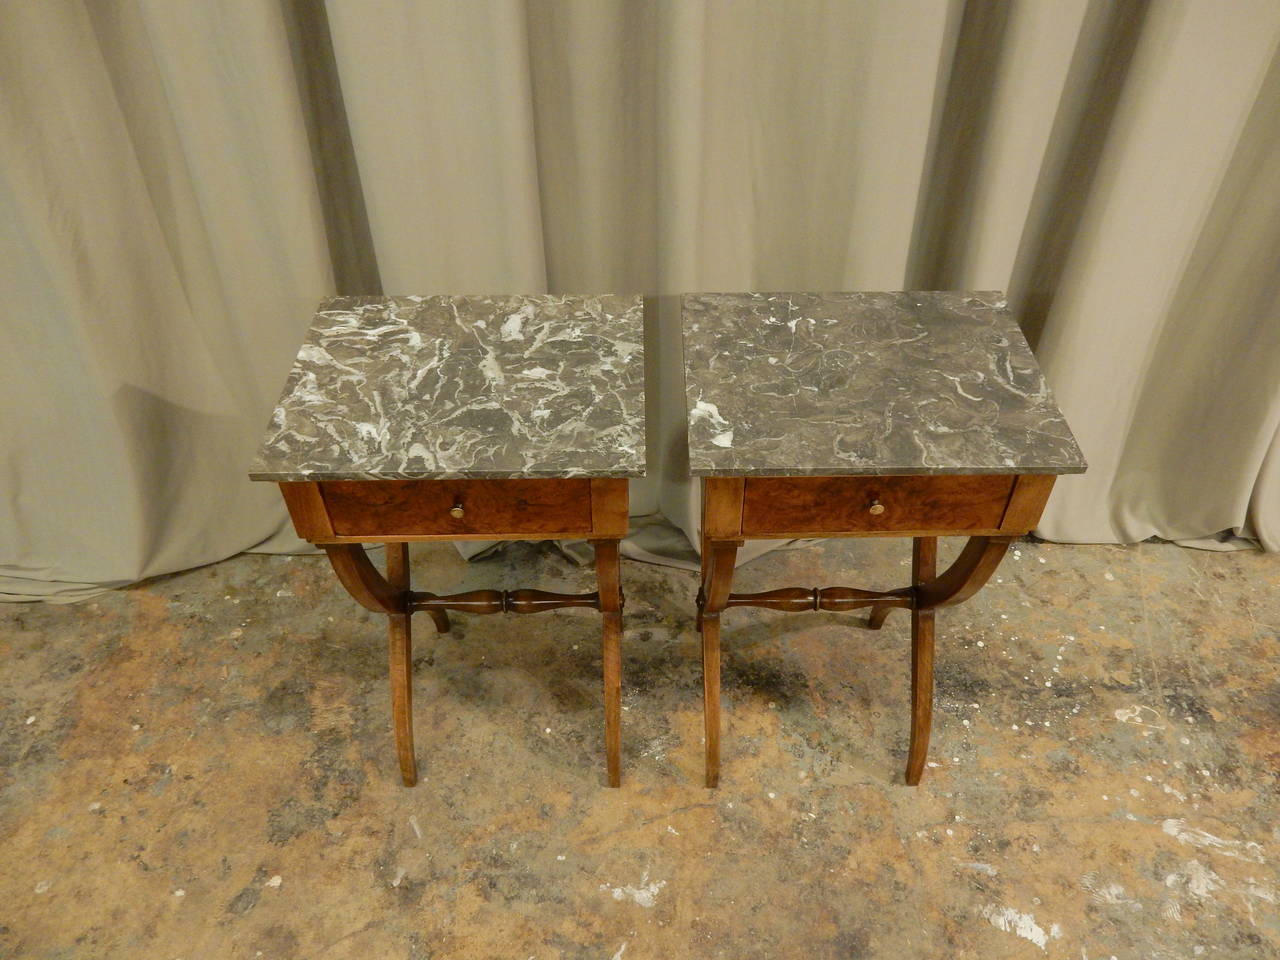 Pair of mid-19th century French walnut side tables with one draw and marble top.
carefully restored.